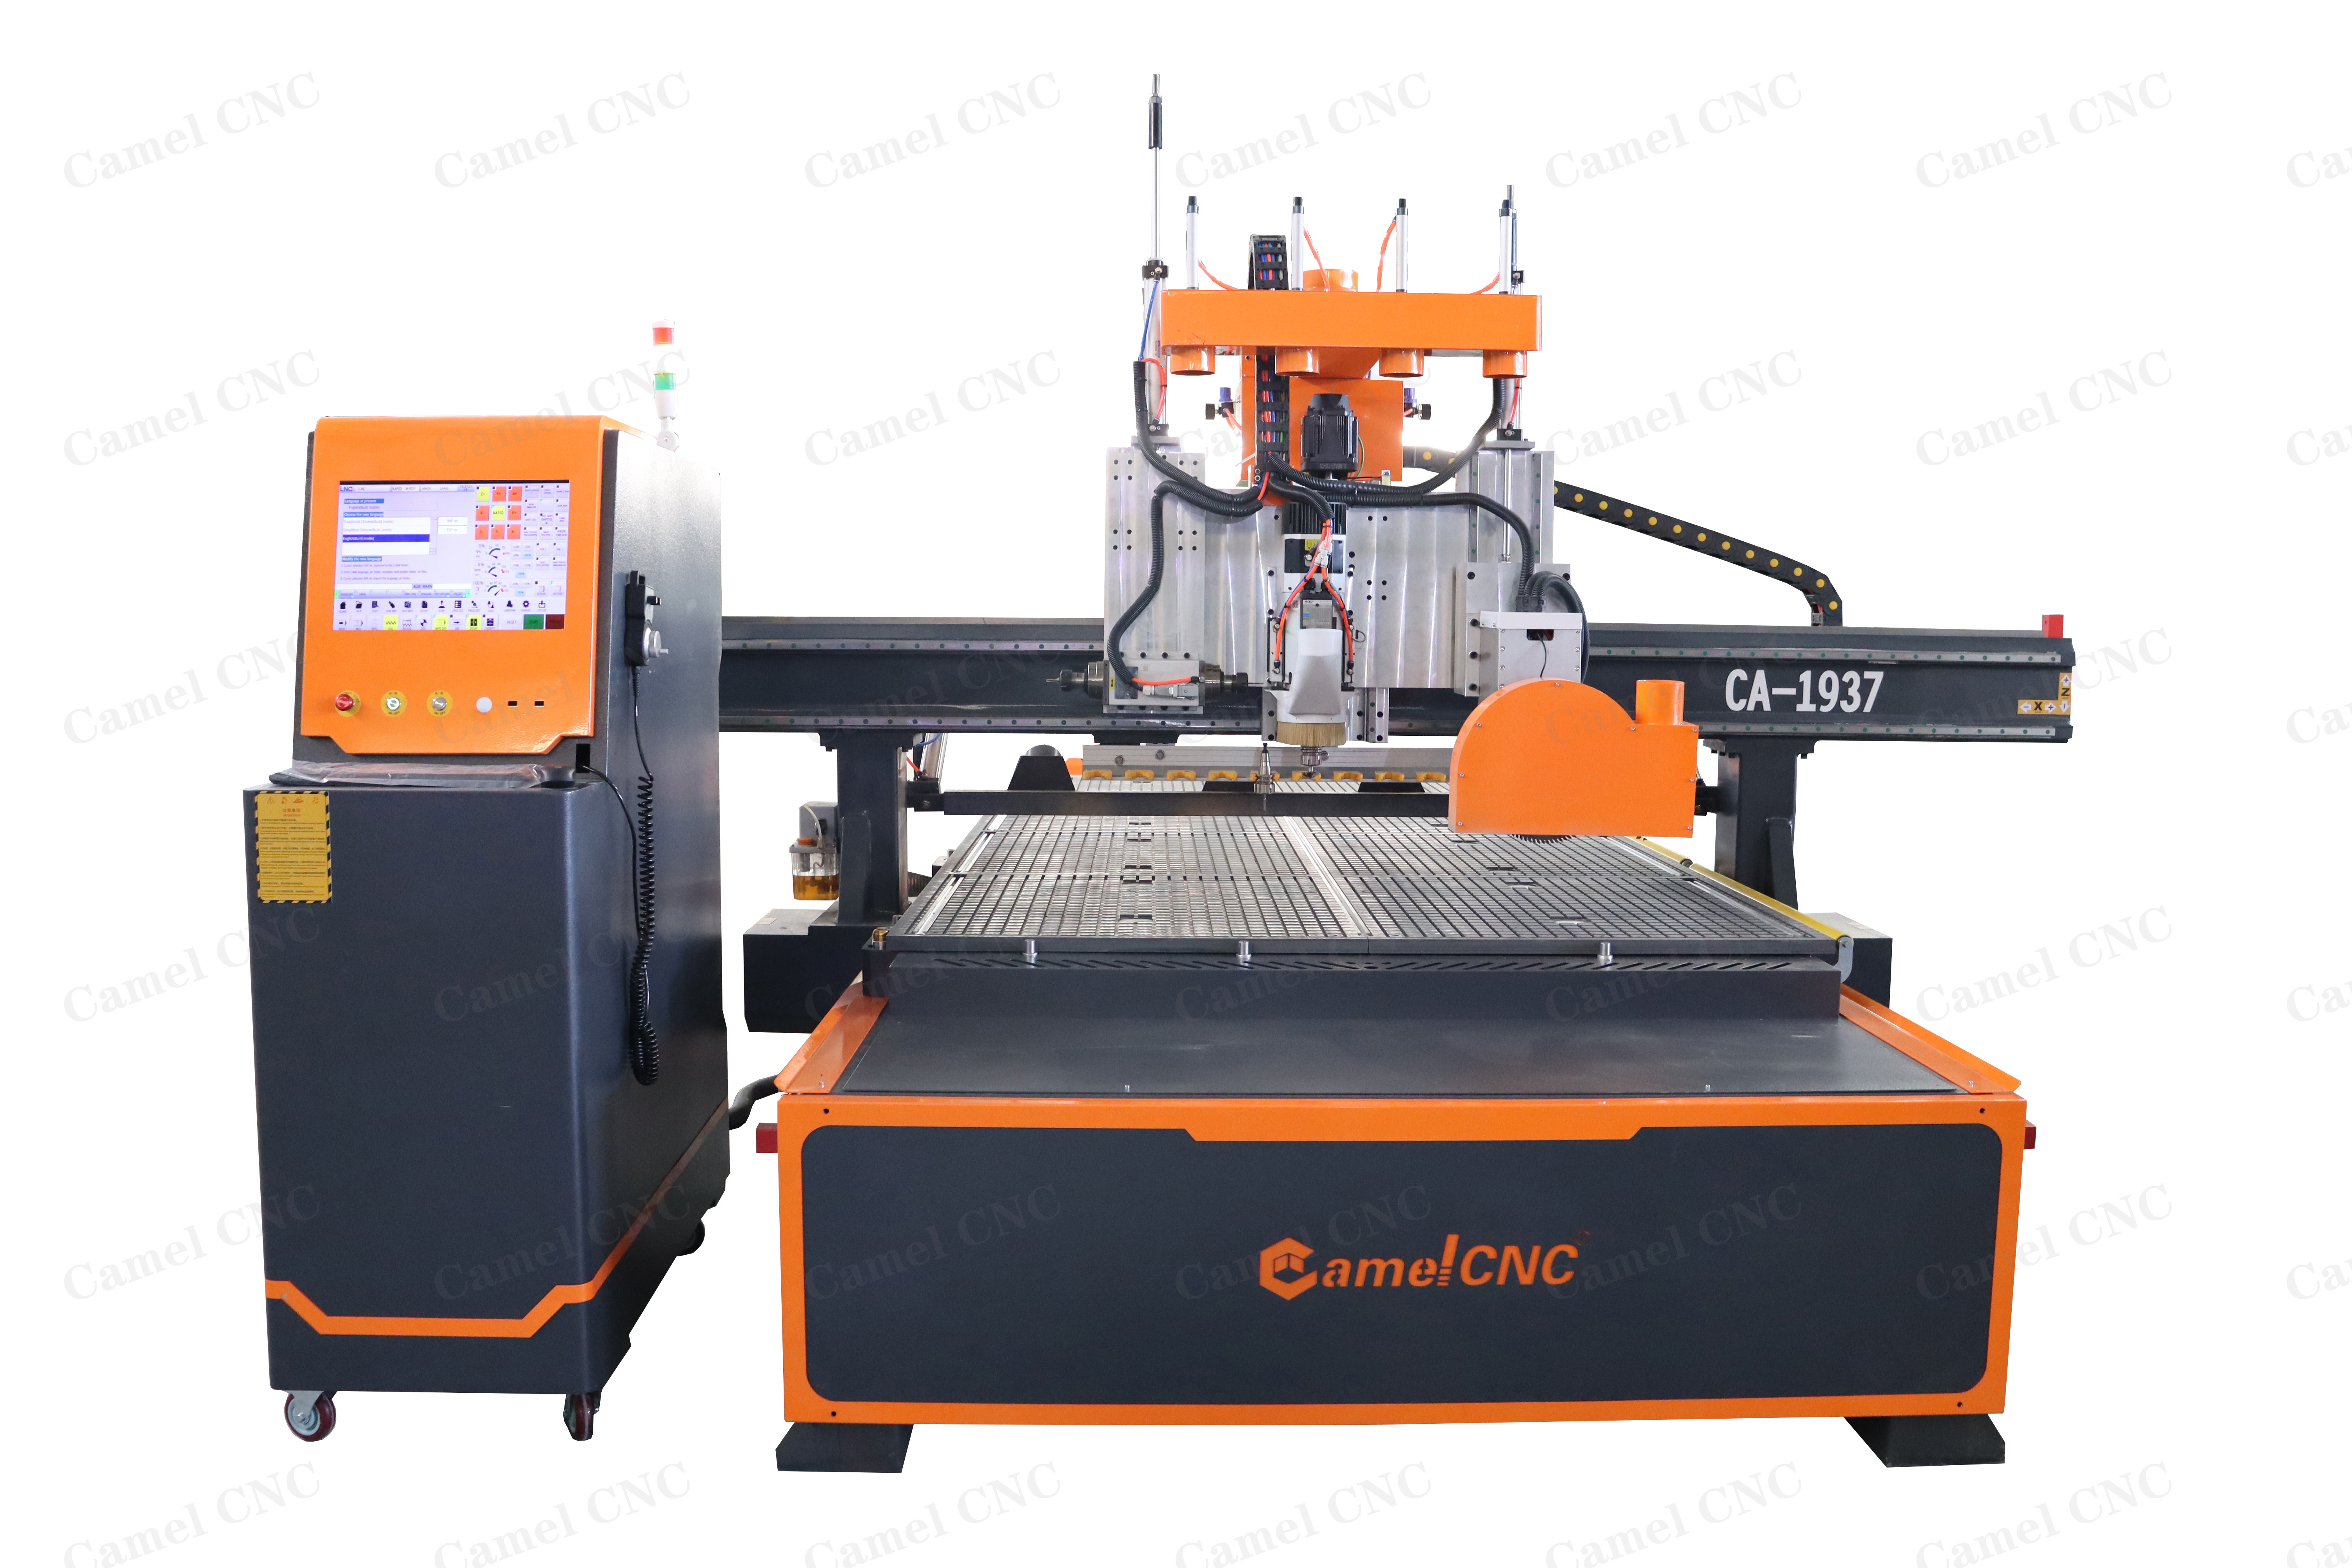 CA-1937 4 Axis ATC CNC Router With Swing Saw Head